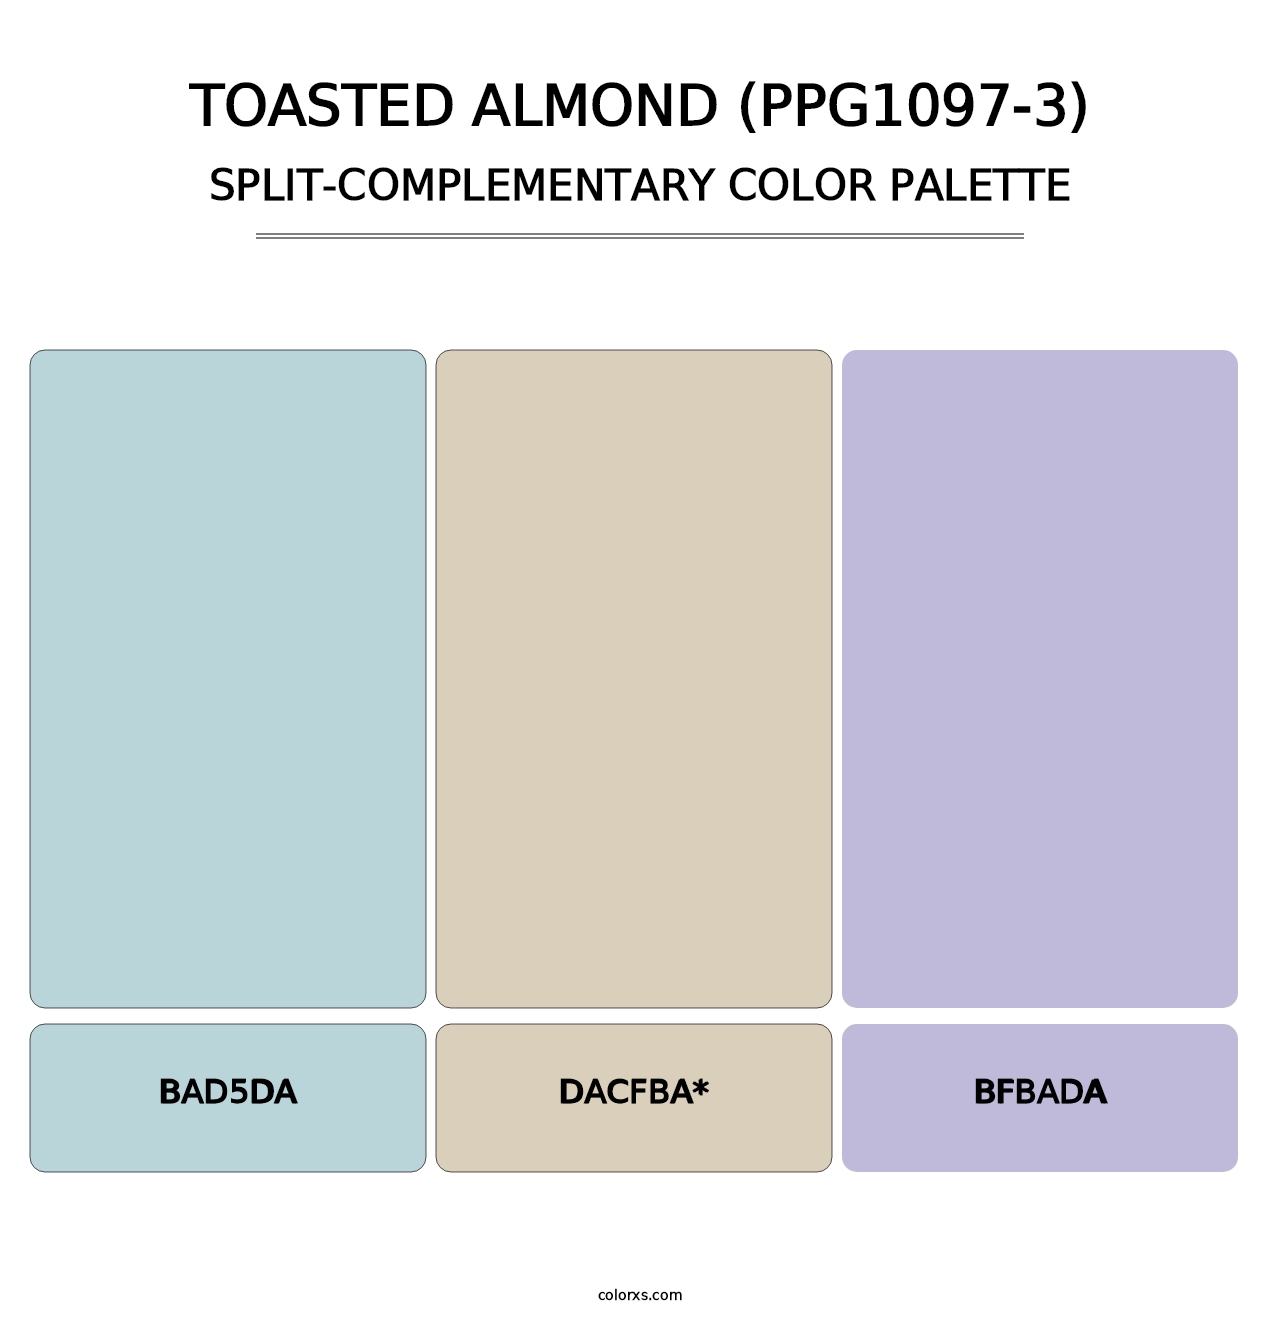 Toasted Almond (PPG1097-3) - Split-Complementary Color Palette